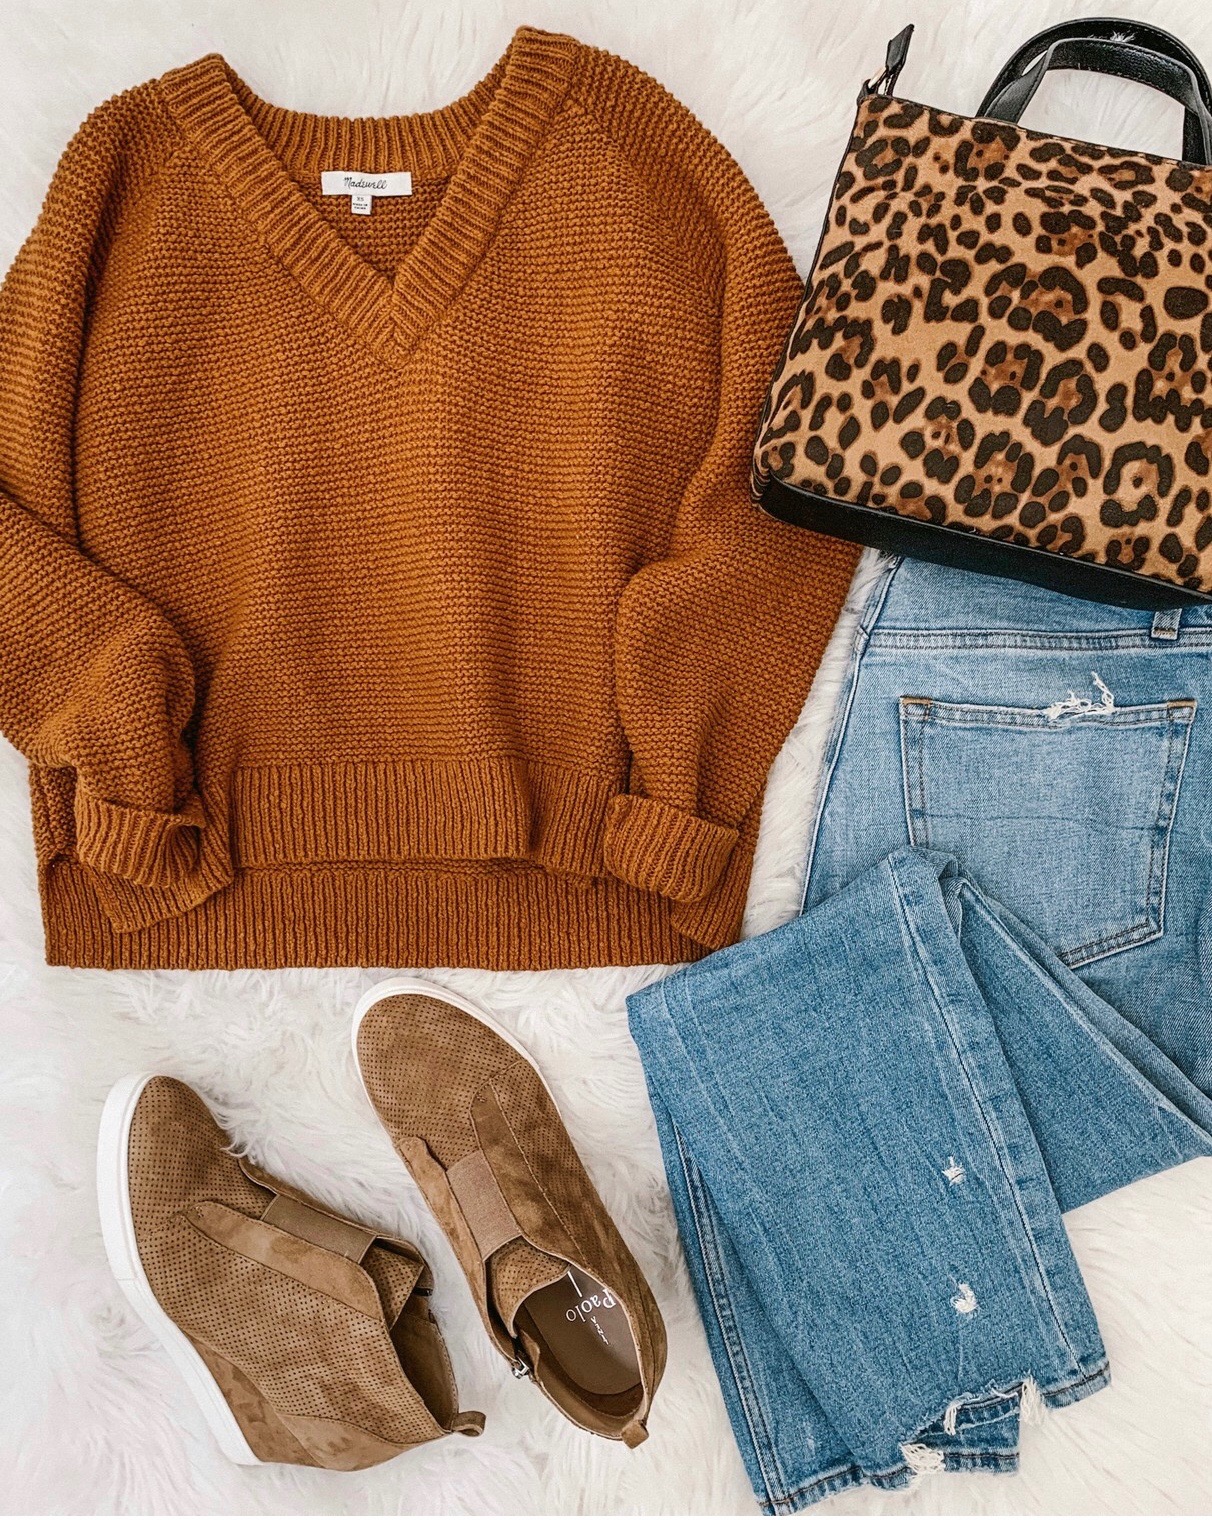 Fall outfit inspiration 